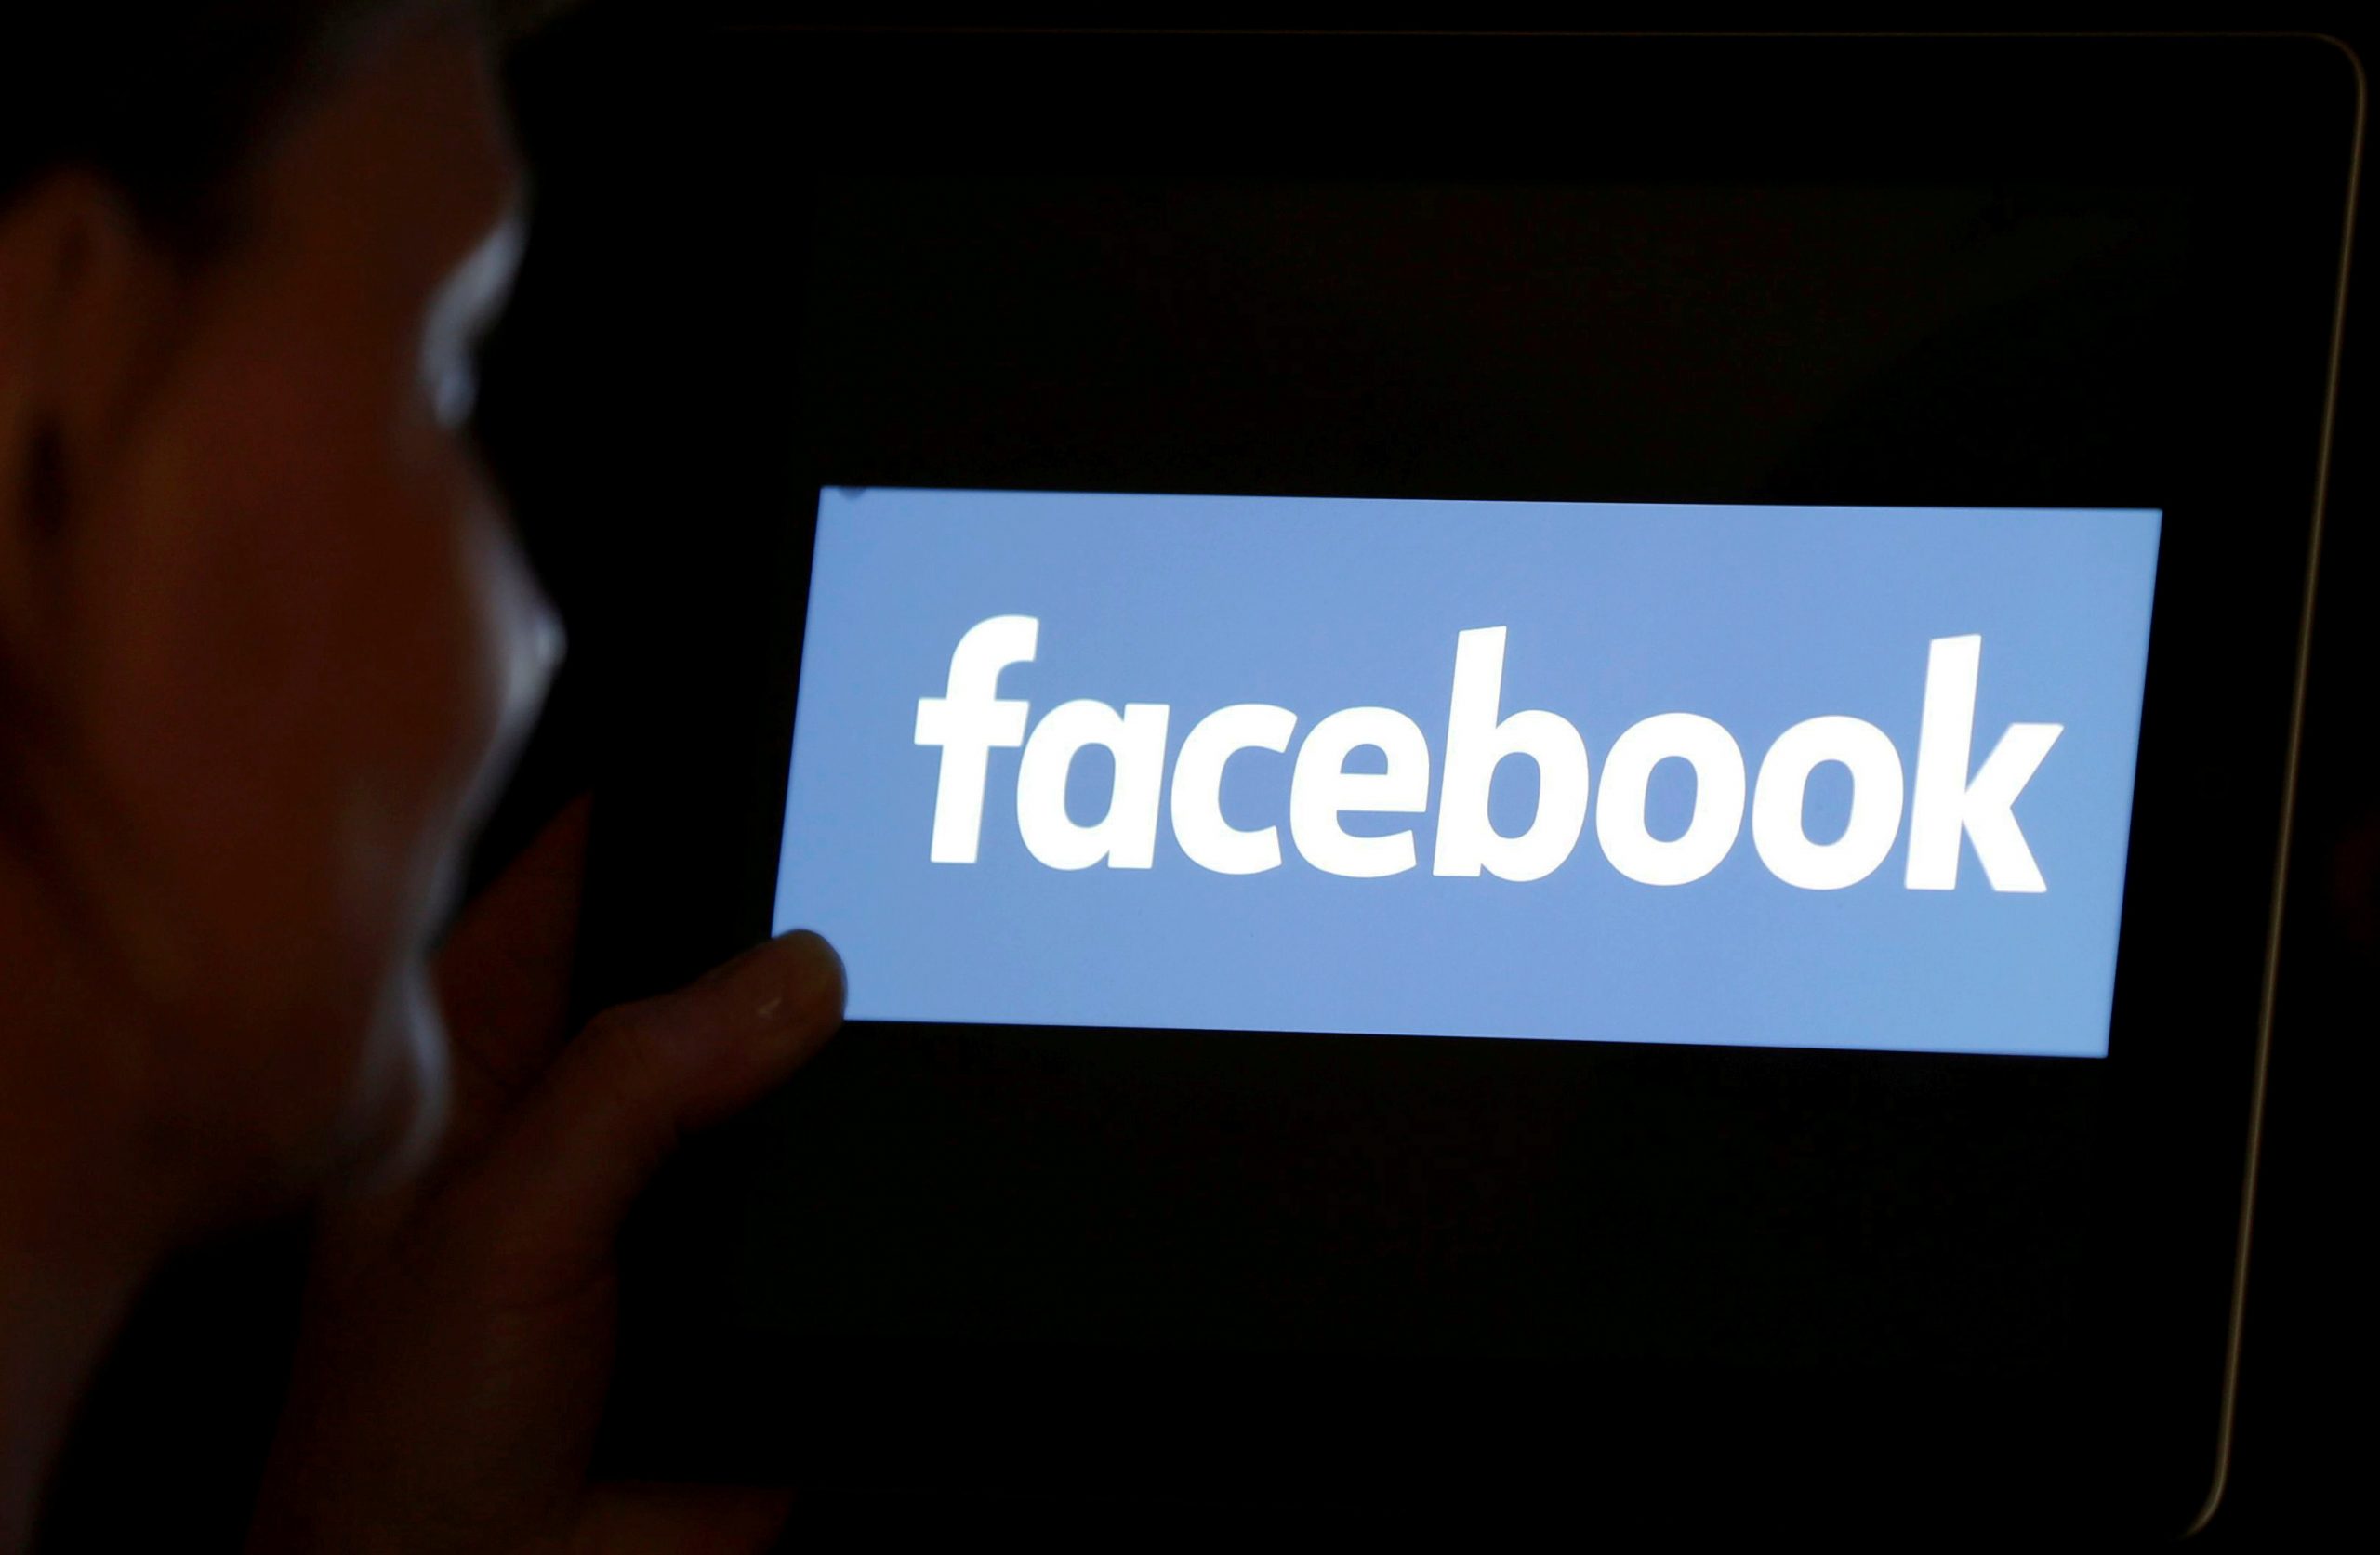 FILE PHOTO: A woman looks at the Facebook logo on an iPad in this photo illustration FILE PHOTO: A woman looks at the Facebook logo on an iPad in this photo illustration taken June 3, 2018. REUTERS/Regis Duvignau/Illustration/File Photo REGIS DUVIGNAU